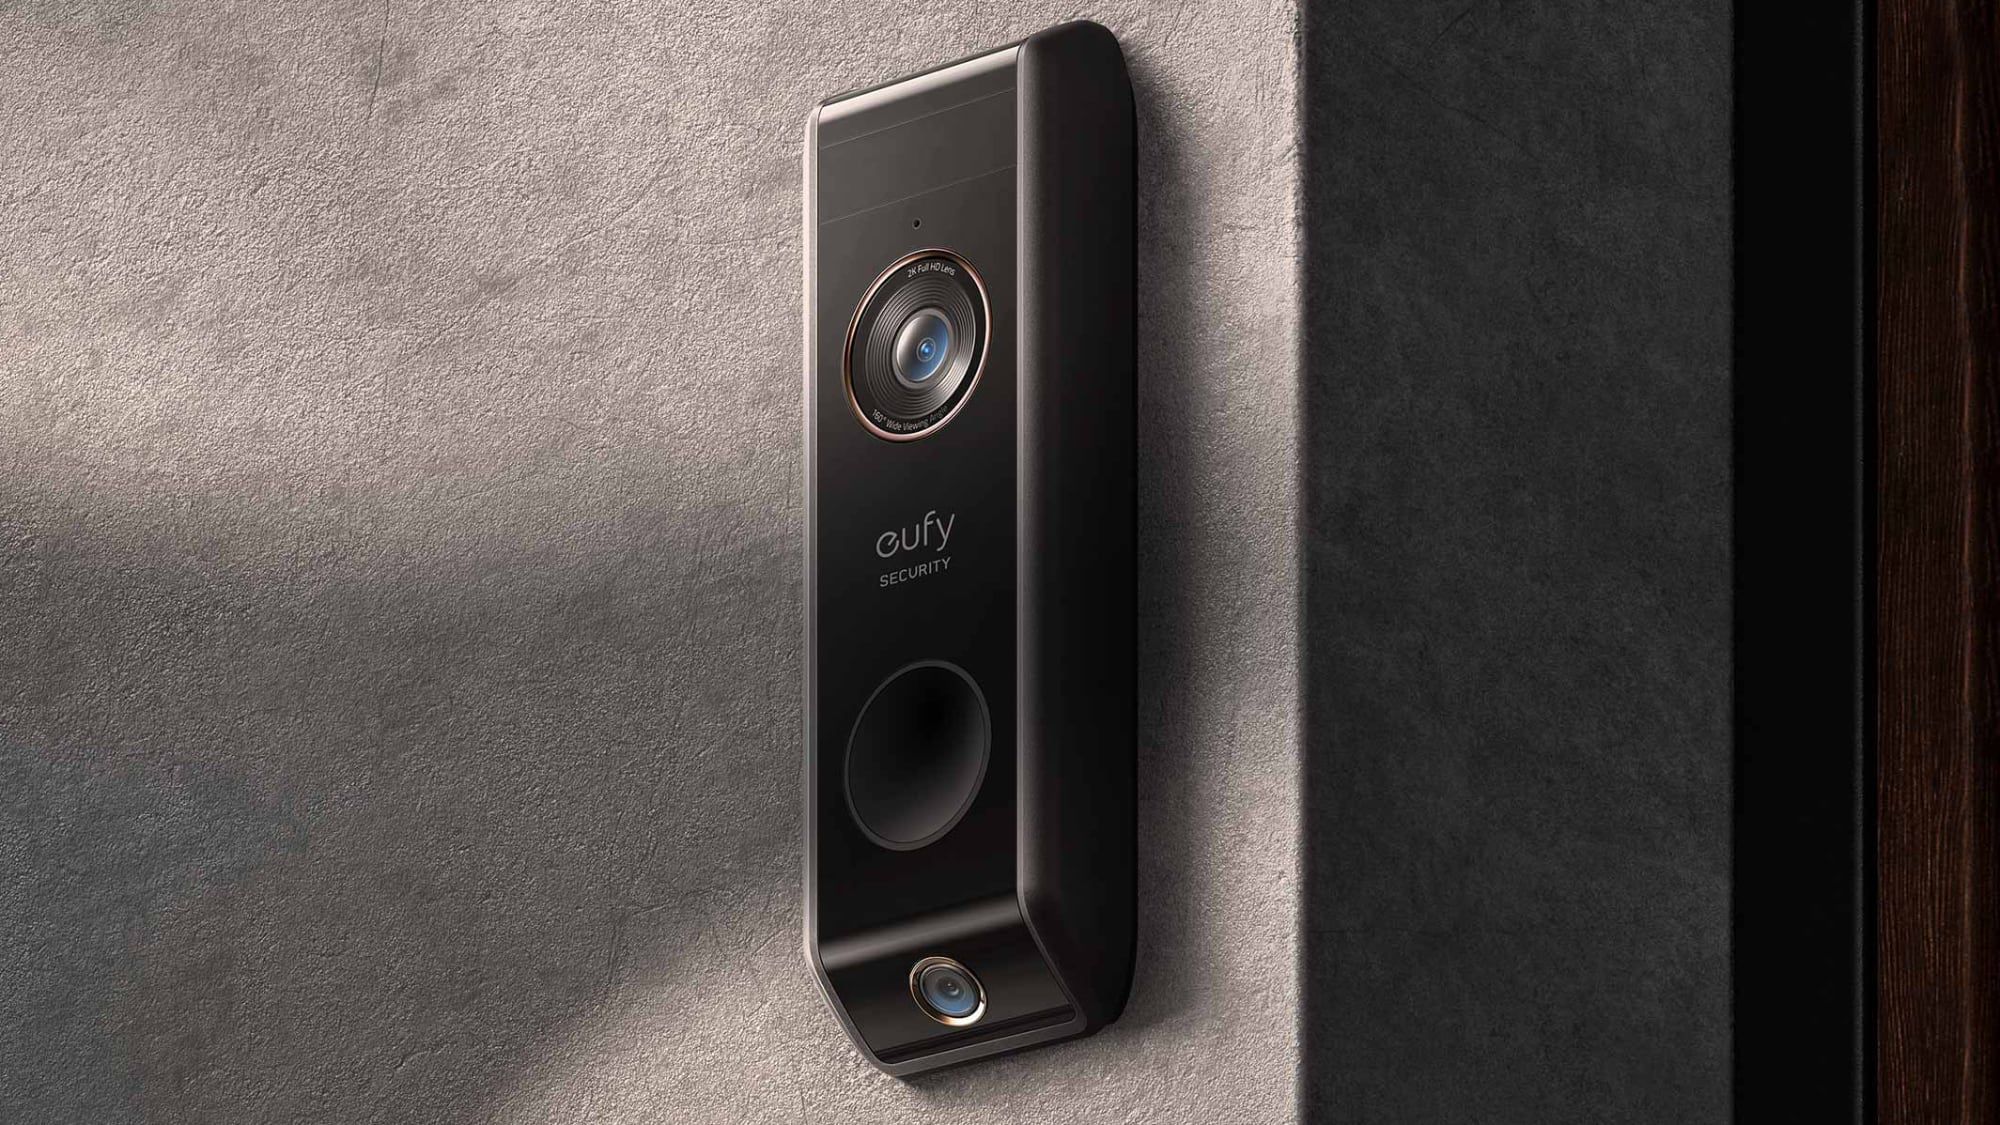 Anker's Eufy Cameras Caught Uploading Content to the Cloud Without User Consent ..